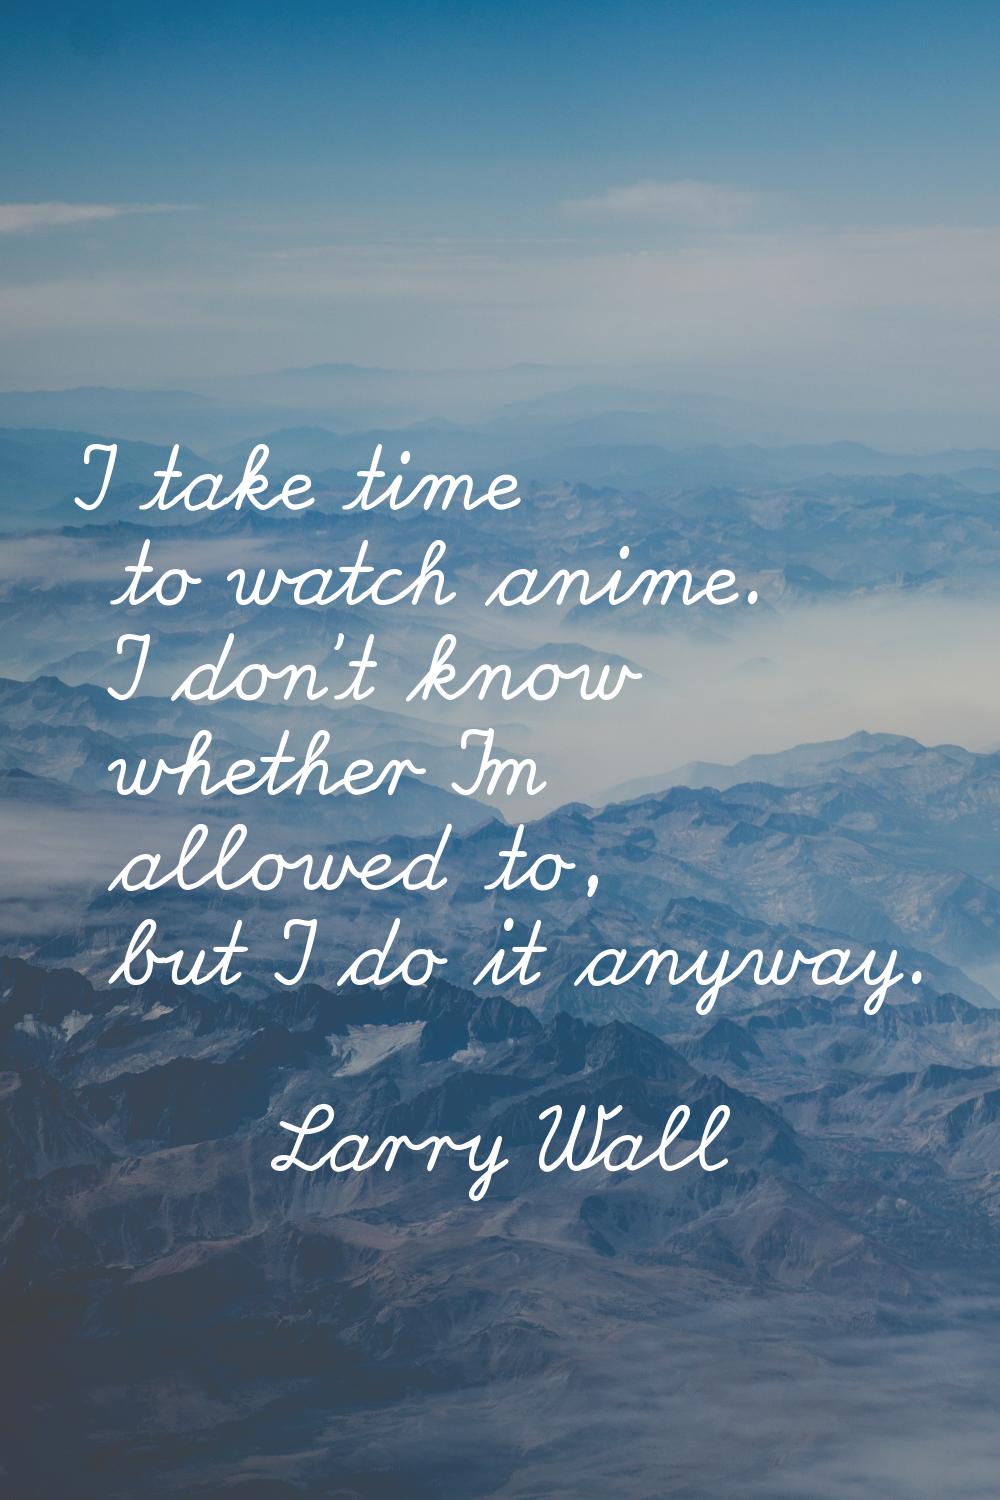 I take time to watch anime. I don't know whether I'm allowed to, but I do it anyway.